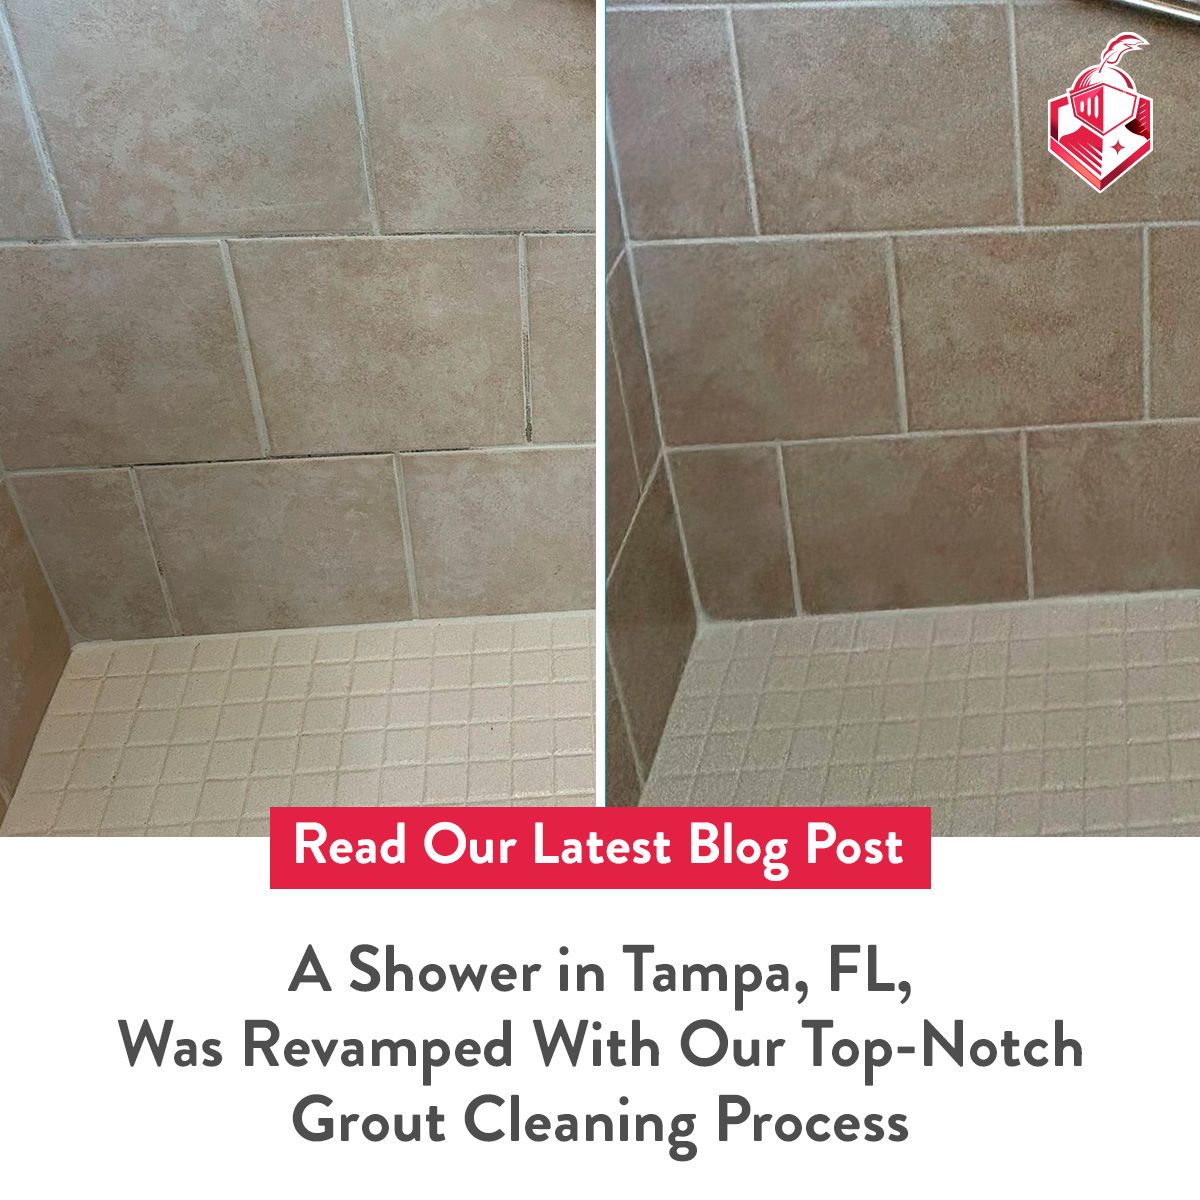 A Shower in Tampa, FL, Was Revamped With Our Top-Notch Grout Cleaning Process